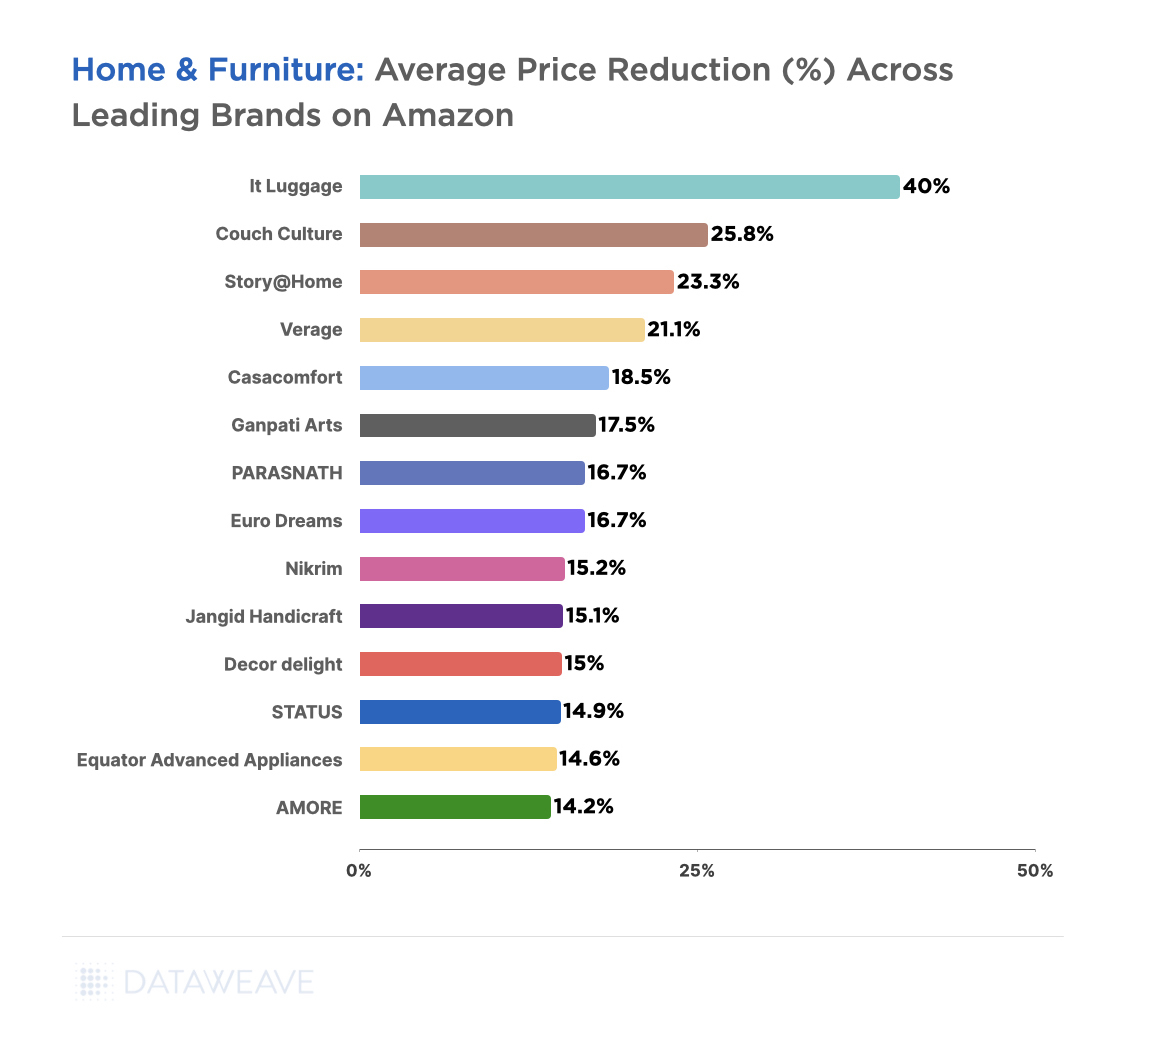 Home & furniture average price reduction across leading brands on Amazon.